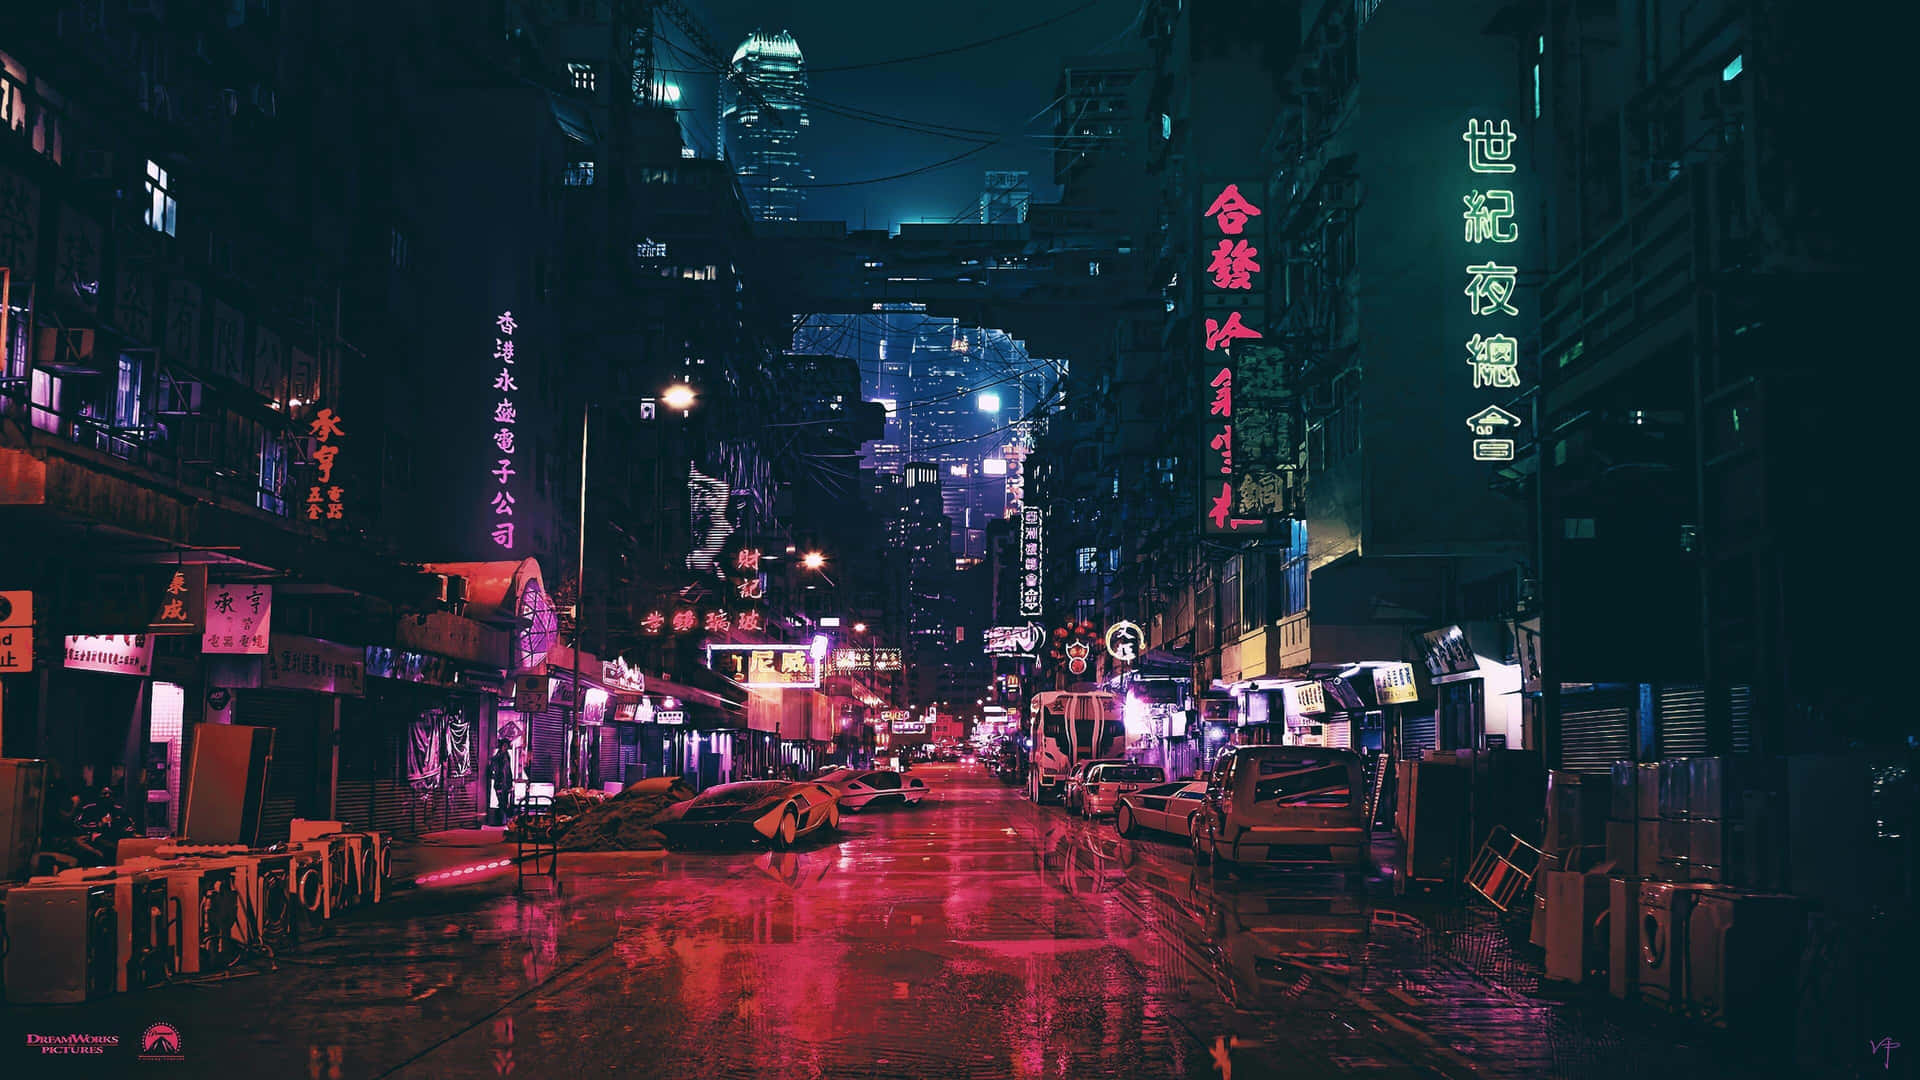 A City Street With Neon Lights And Neon Signs Wallpaper